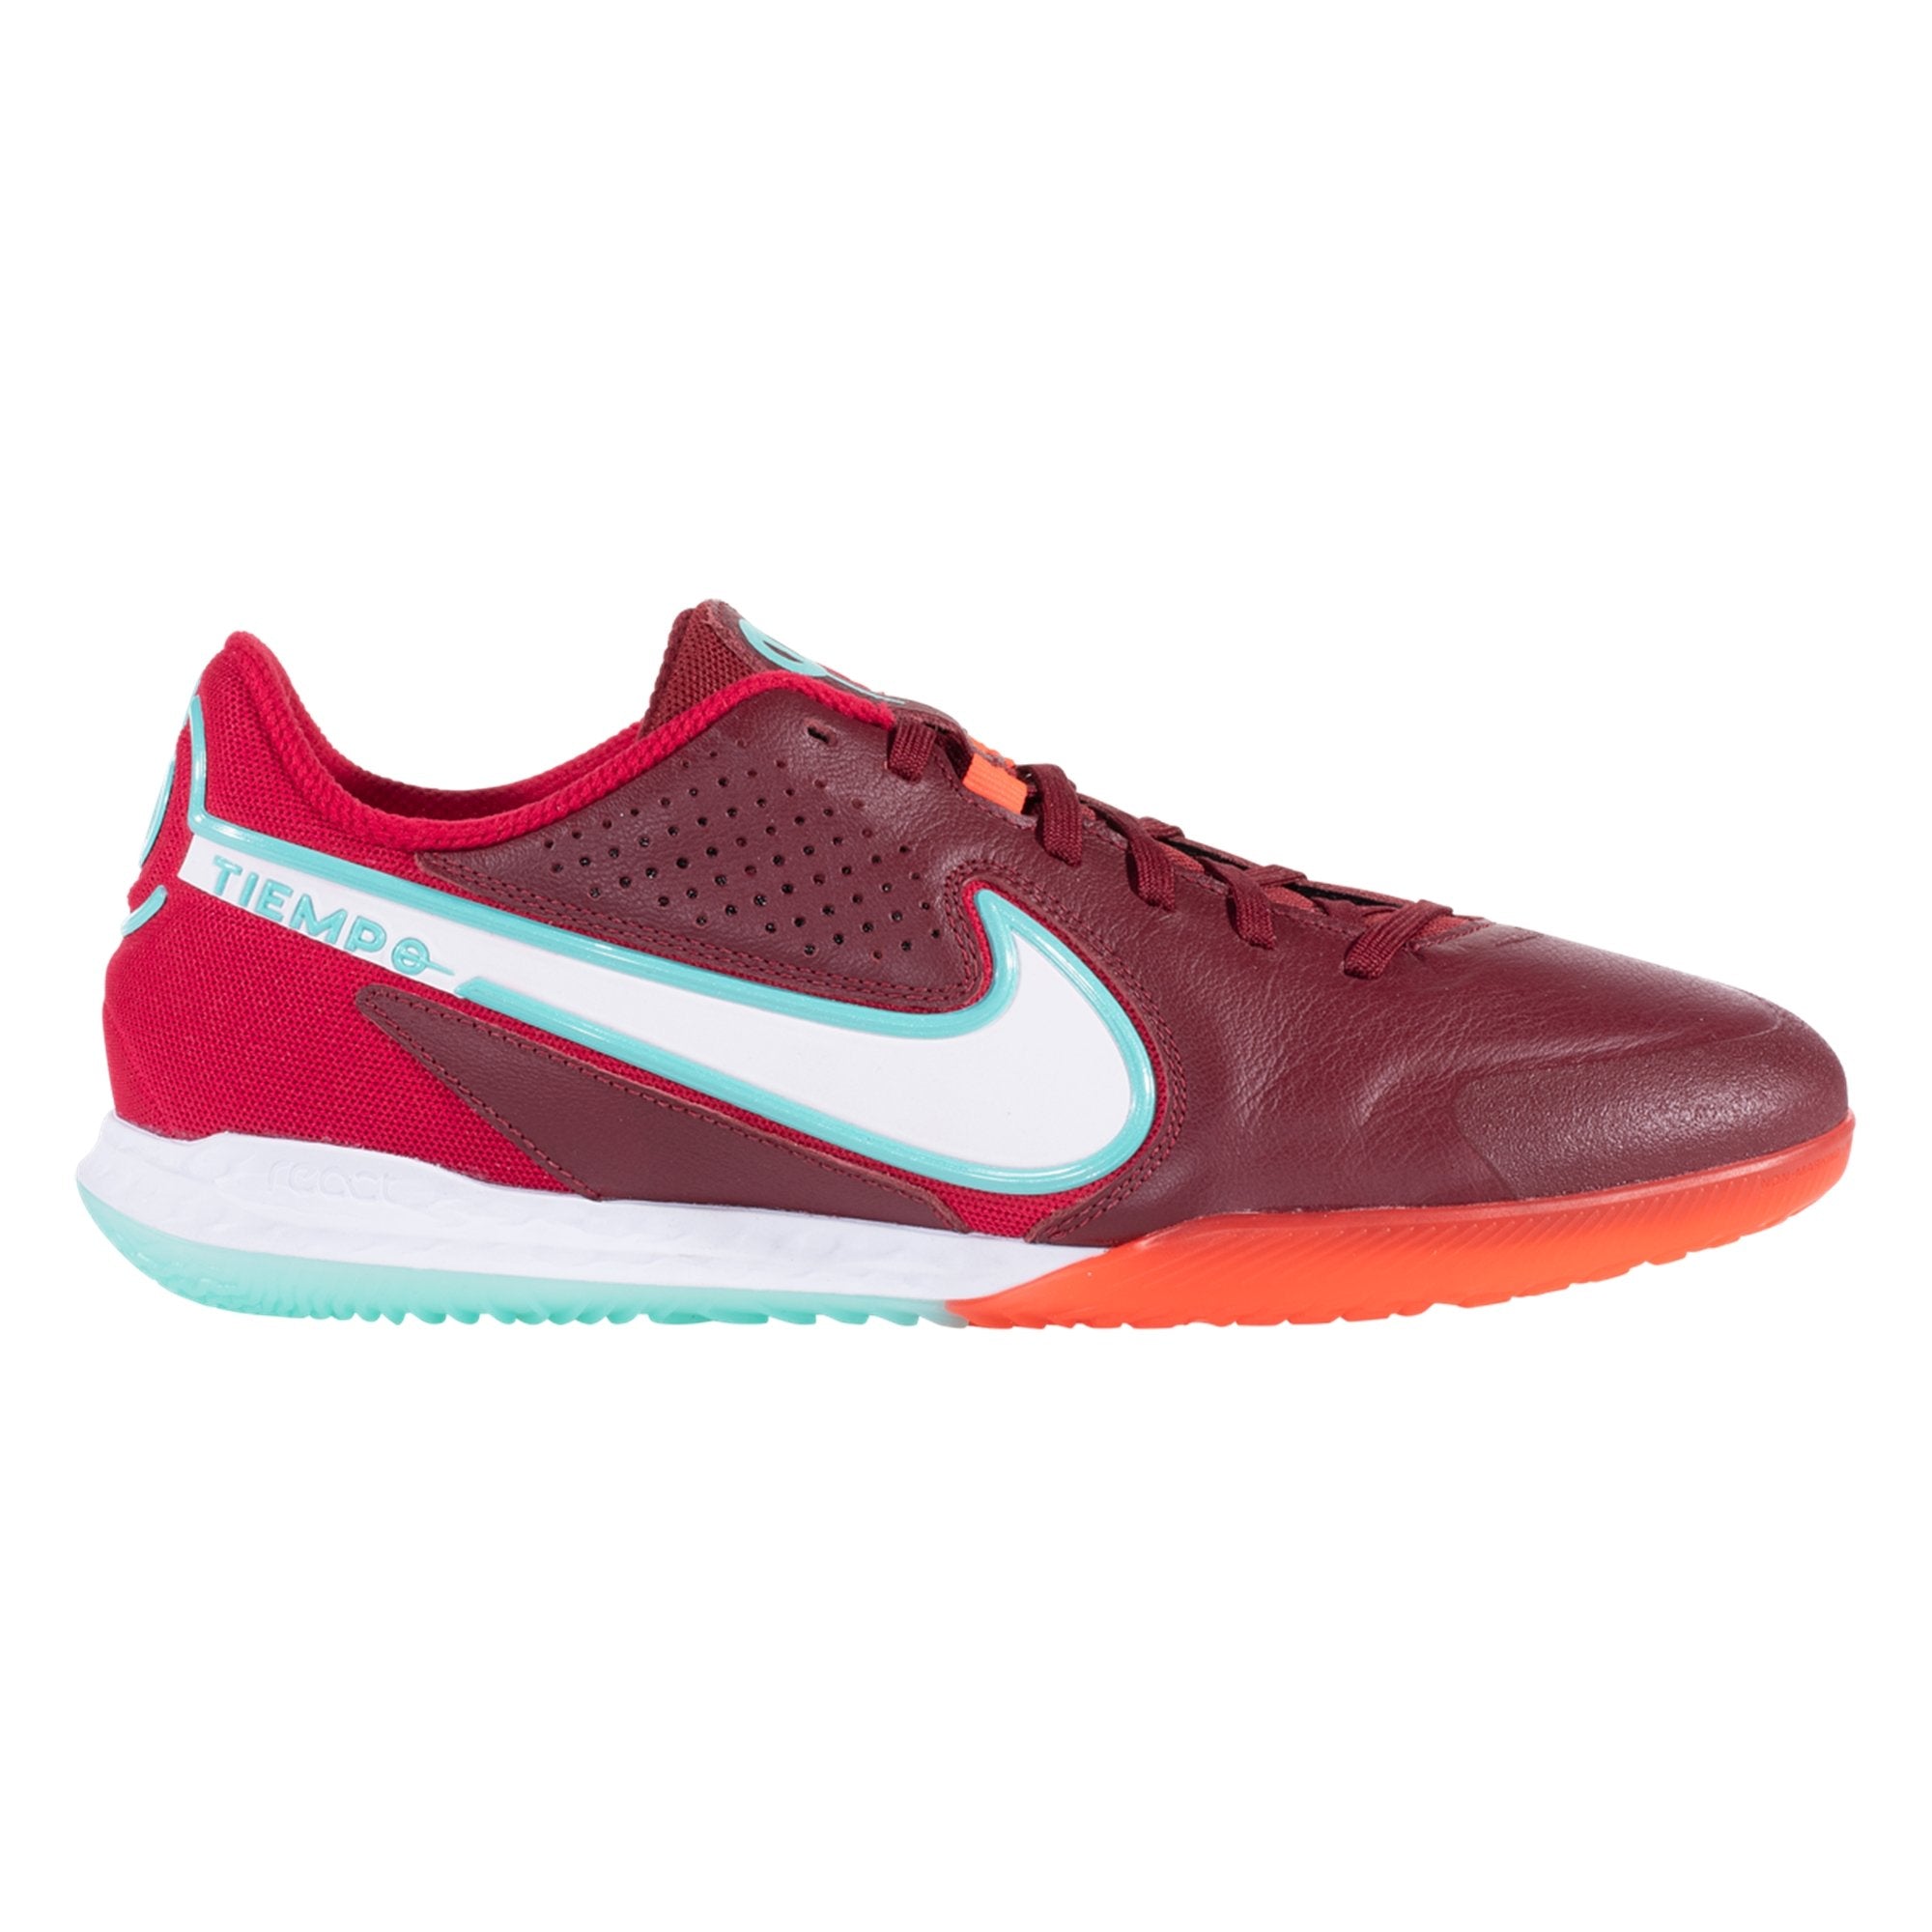 Nike Tiempo Legend 9 Academy IC Indoor Soccer Shoe - Team Red/White/Mystic  Hibiscus/Bright Crimson/Dynamic Turquoise DA1190-616 – Soccer Zone USA